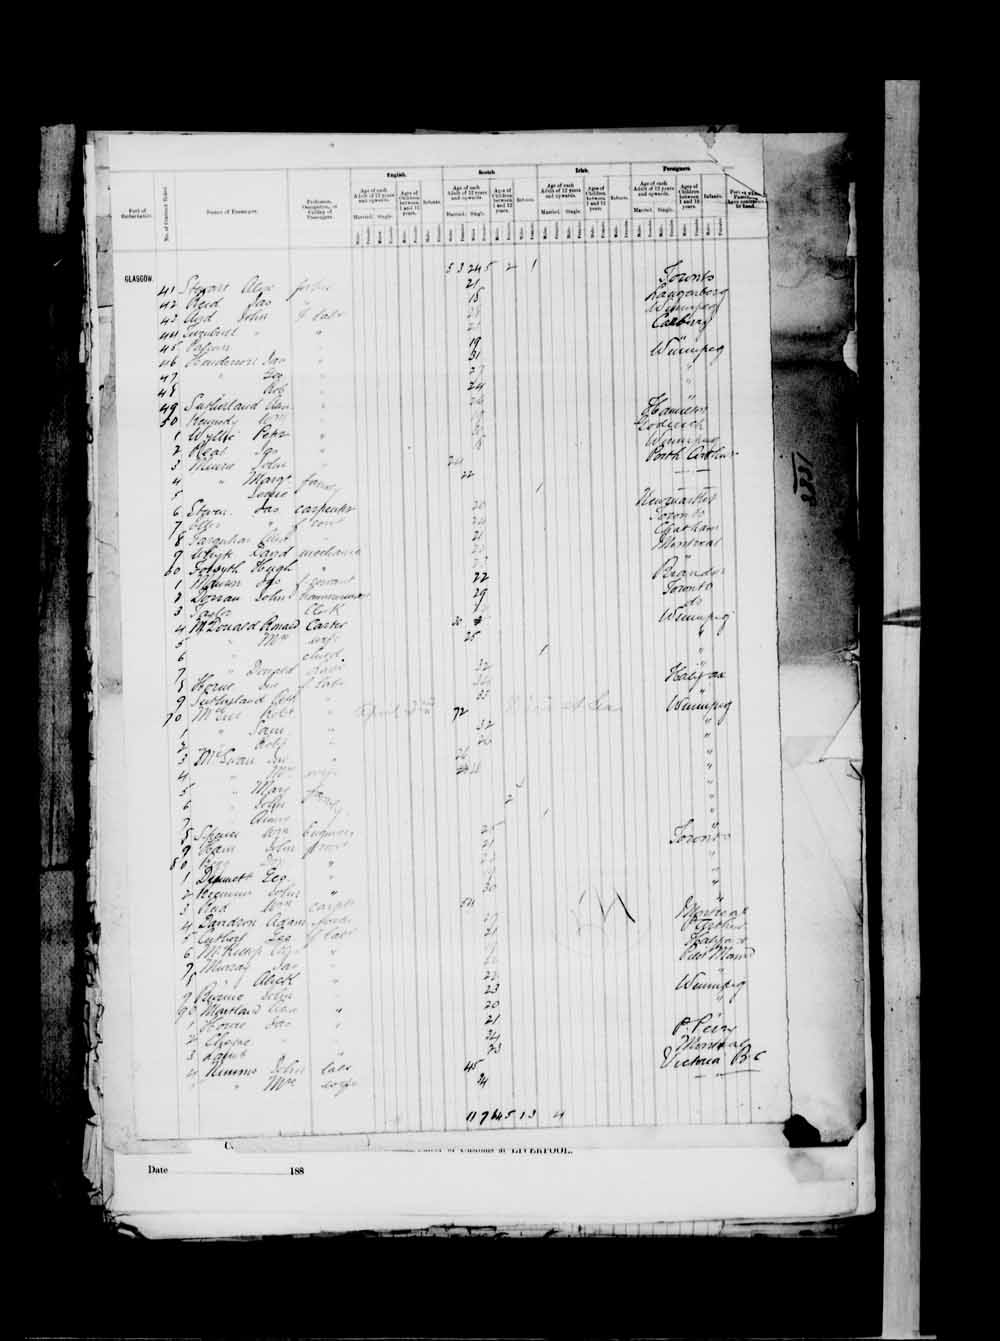 Digitized page of Passenger Lists for Image No.: e003674500